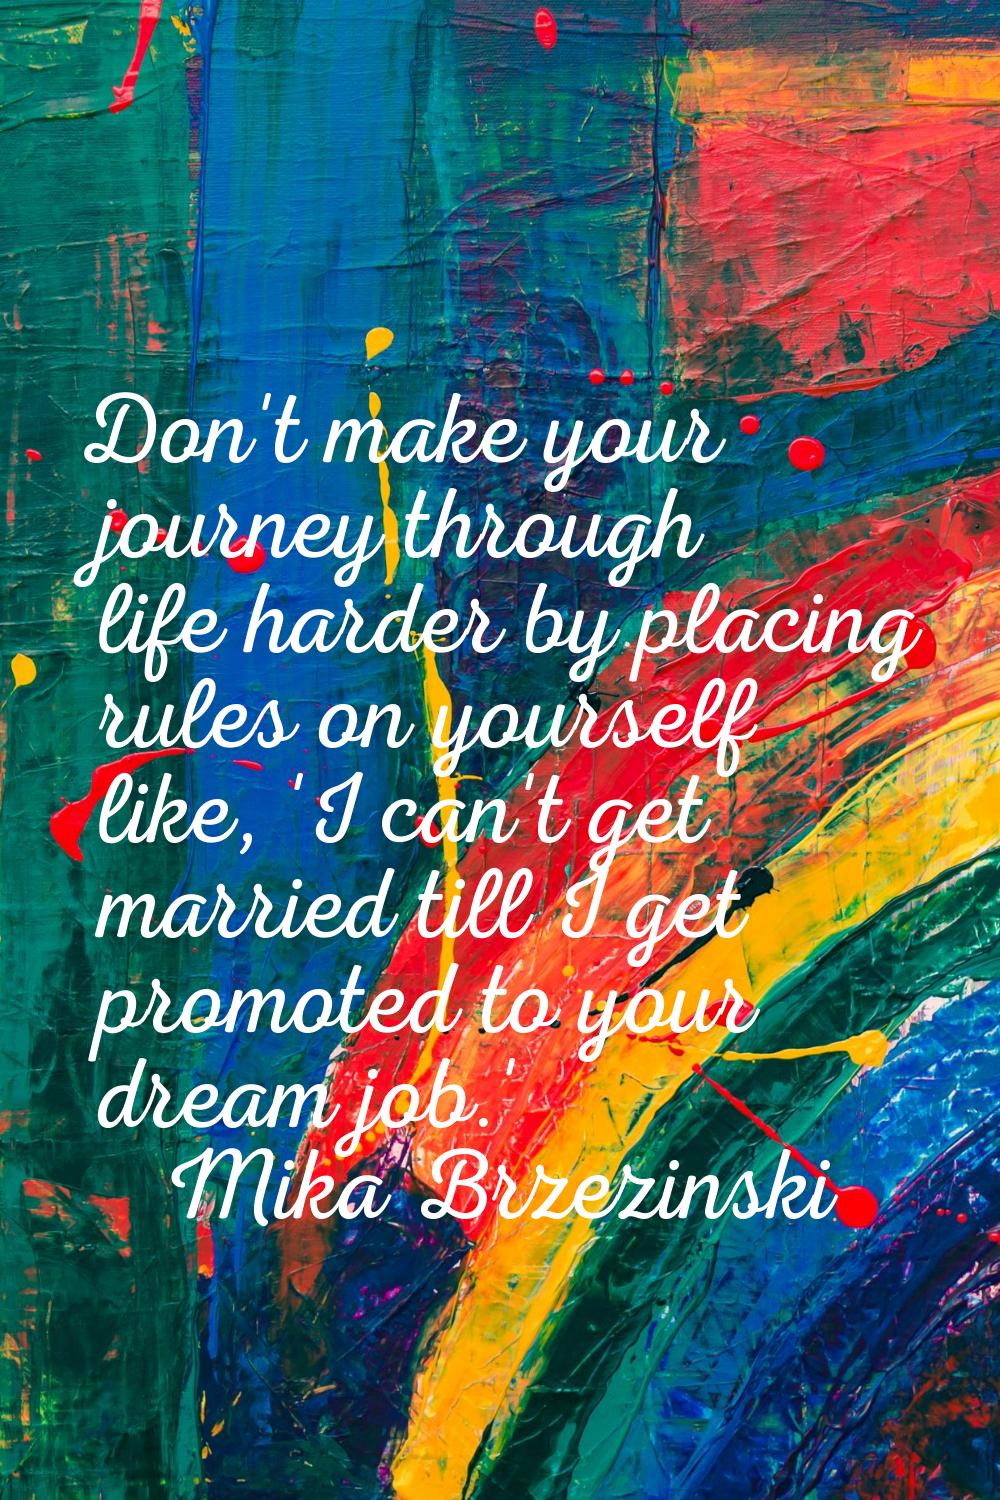 Don't make your journey through life harder by placing rules on yourself like, 'I can't get married